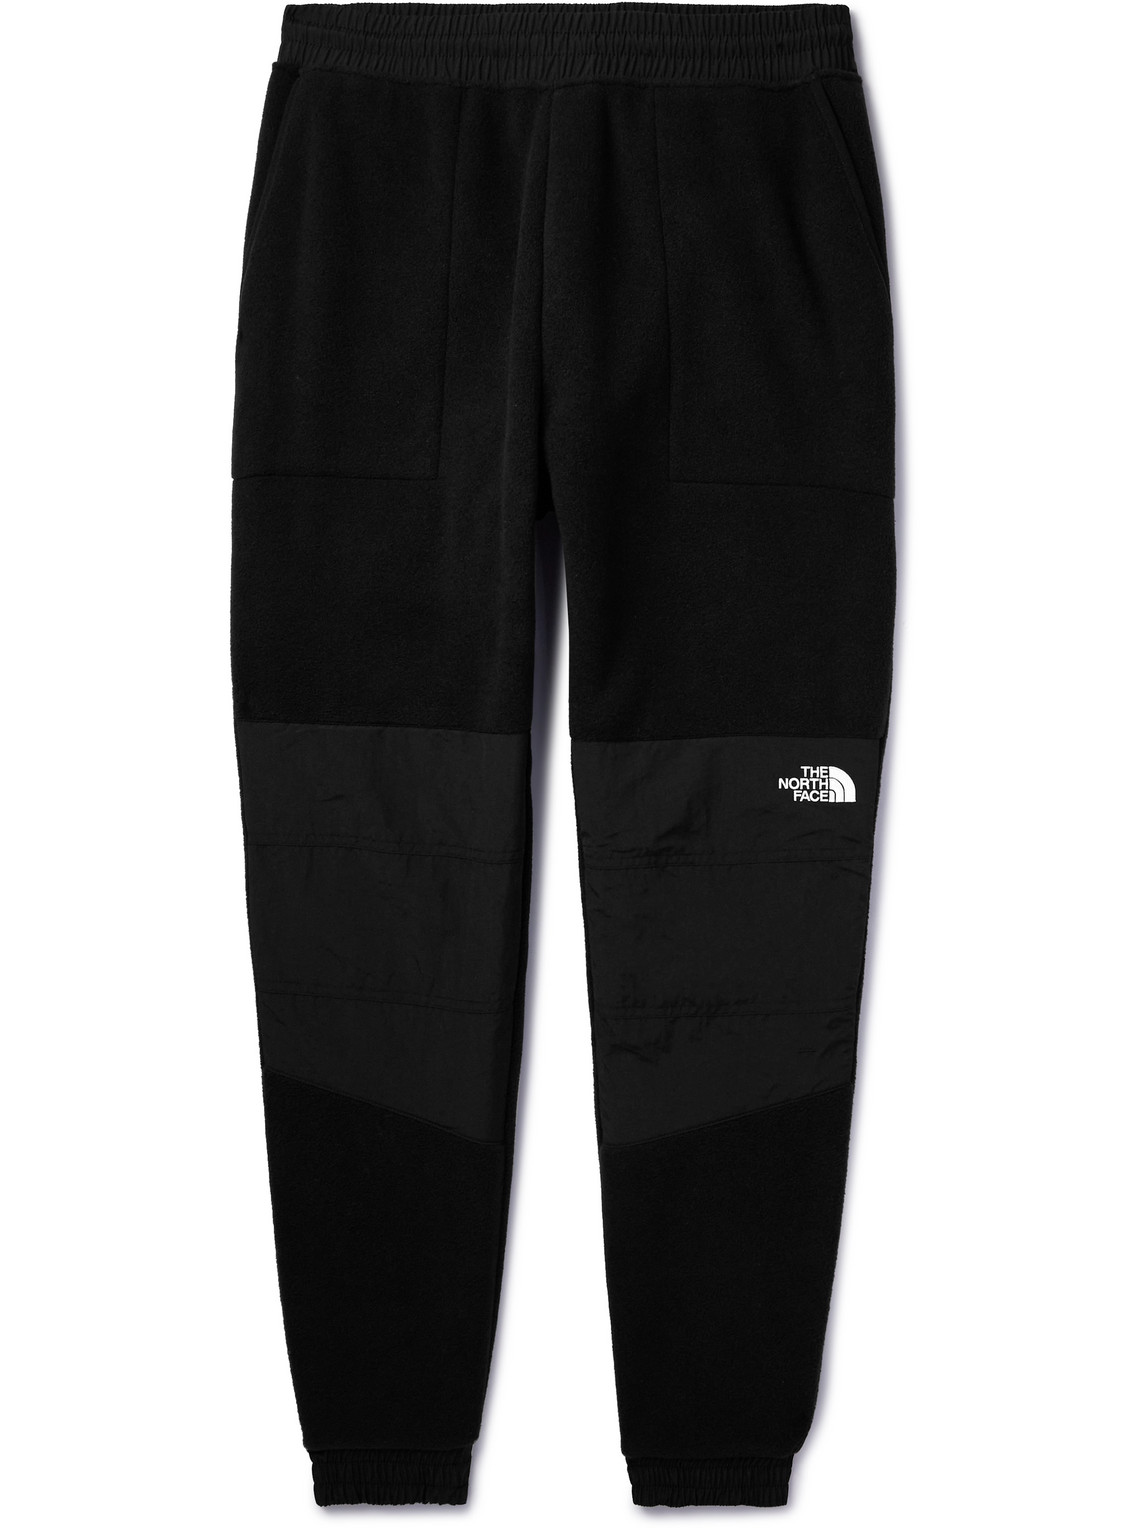 The North Face - Denali Tapered Recycled Polartec Fleece and Shell Sweatpants - Men - Black - XL von The North Face